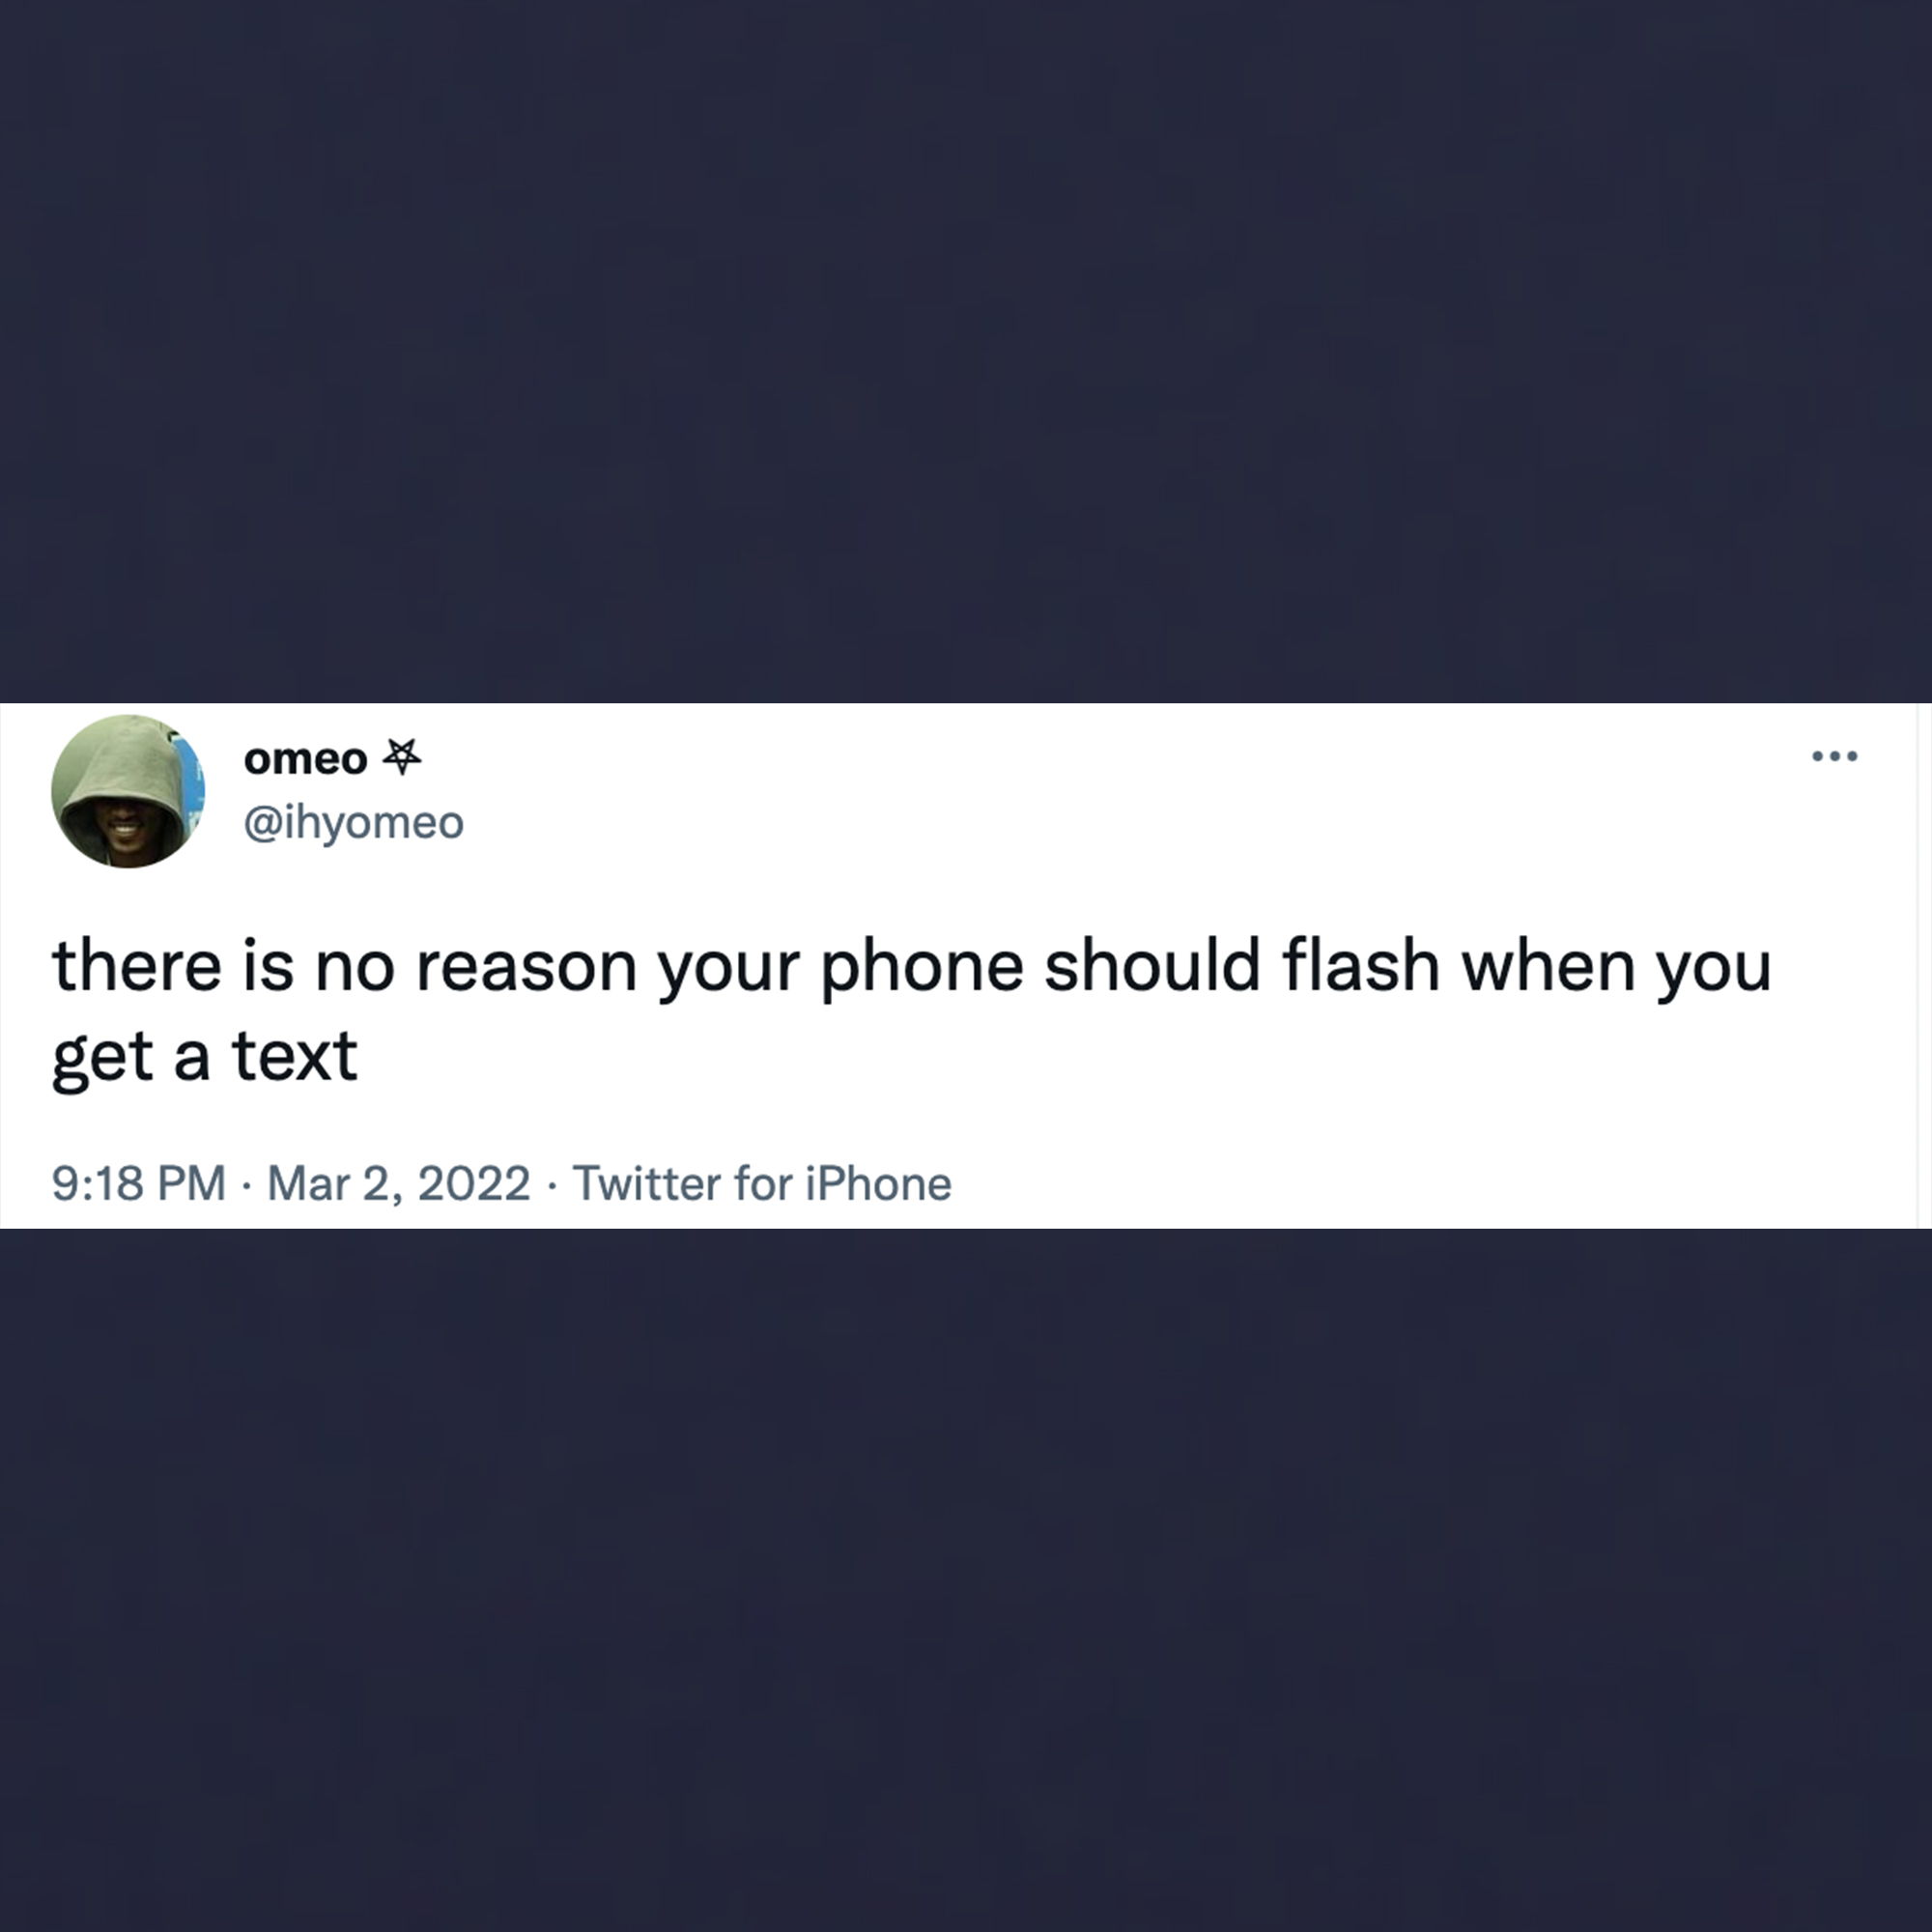 funny tweets - website - S. omeo there is no reason your phone should flash when you get a text Twitter for iPhone